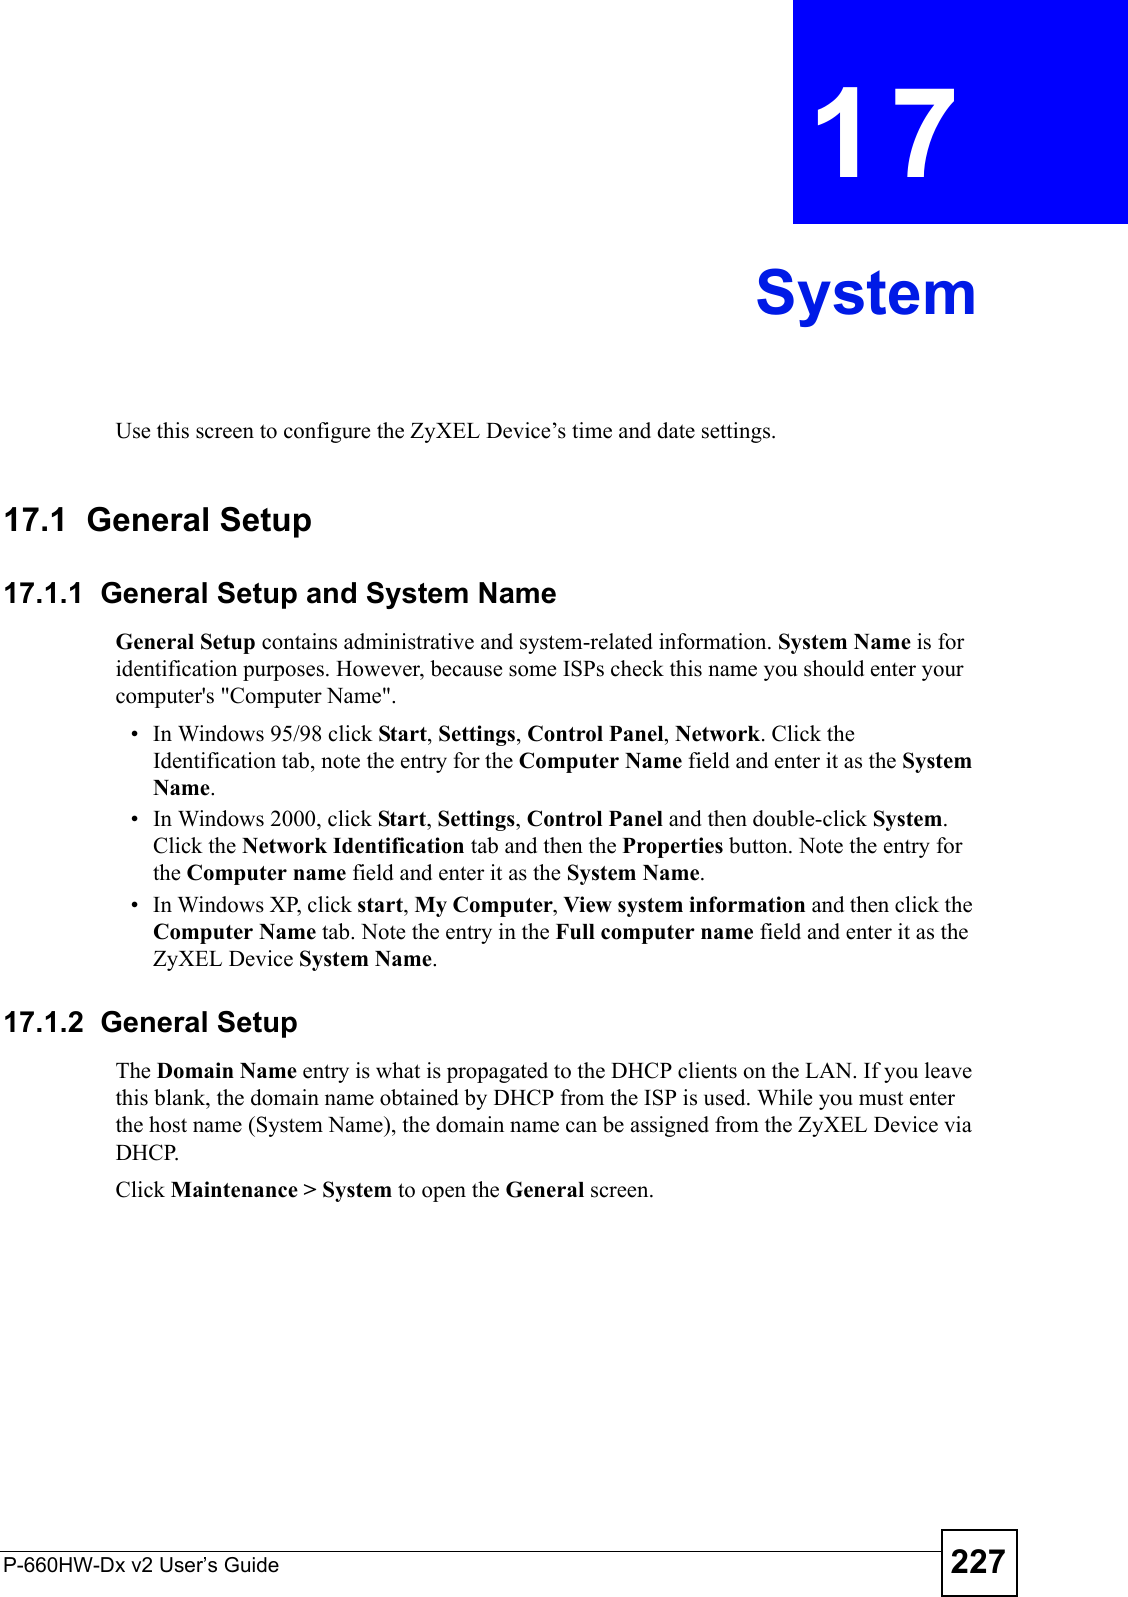 P-660HW-Dx v2 User’s Guide 227CHAPTER  17 SystemUse this screen to configure the ZyXEL Device’s time and date settings.17.1  General Setup17.1.1  General Setup and System NameGeneral Setup contains administrative and system-related information. System Name is for identification purposes. However, because some ISPs check this name you should enter your computer&apos;s &quot;Computer Name&quot;. • In Windows 95/98 click Start, Settings, Control Panel, Network. Click the Identification tab, note the entry for the Computer Name field and enter it as the System Name.• In Windows 2000, click Start, Settings, Control Panel and then double-click System. Click the Network Identification tab and then the Properties button. Note the entry for the Computer name field and enter it as the System Name.• In Windows XP, click start, My Computer, View system information and then click the Computer Name tab. Note the entry in the Full computer name field and enter it as the ZyXEL Device System Name.17.1.2  General Setup The Domain Name entry is what is propagated to the DHCP clients on the LAN. If you leave this blank, the domain name obtained by DHCP from the ISP is used. While you must enter the host name (System Name), the domain name can be assigned from the ZyXEL Device via DHCP.Click Maintenance &gt; System to open the General screen. 